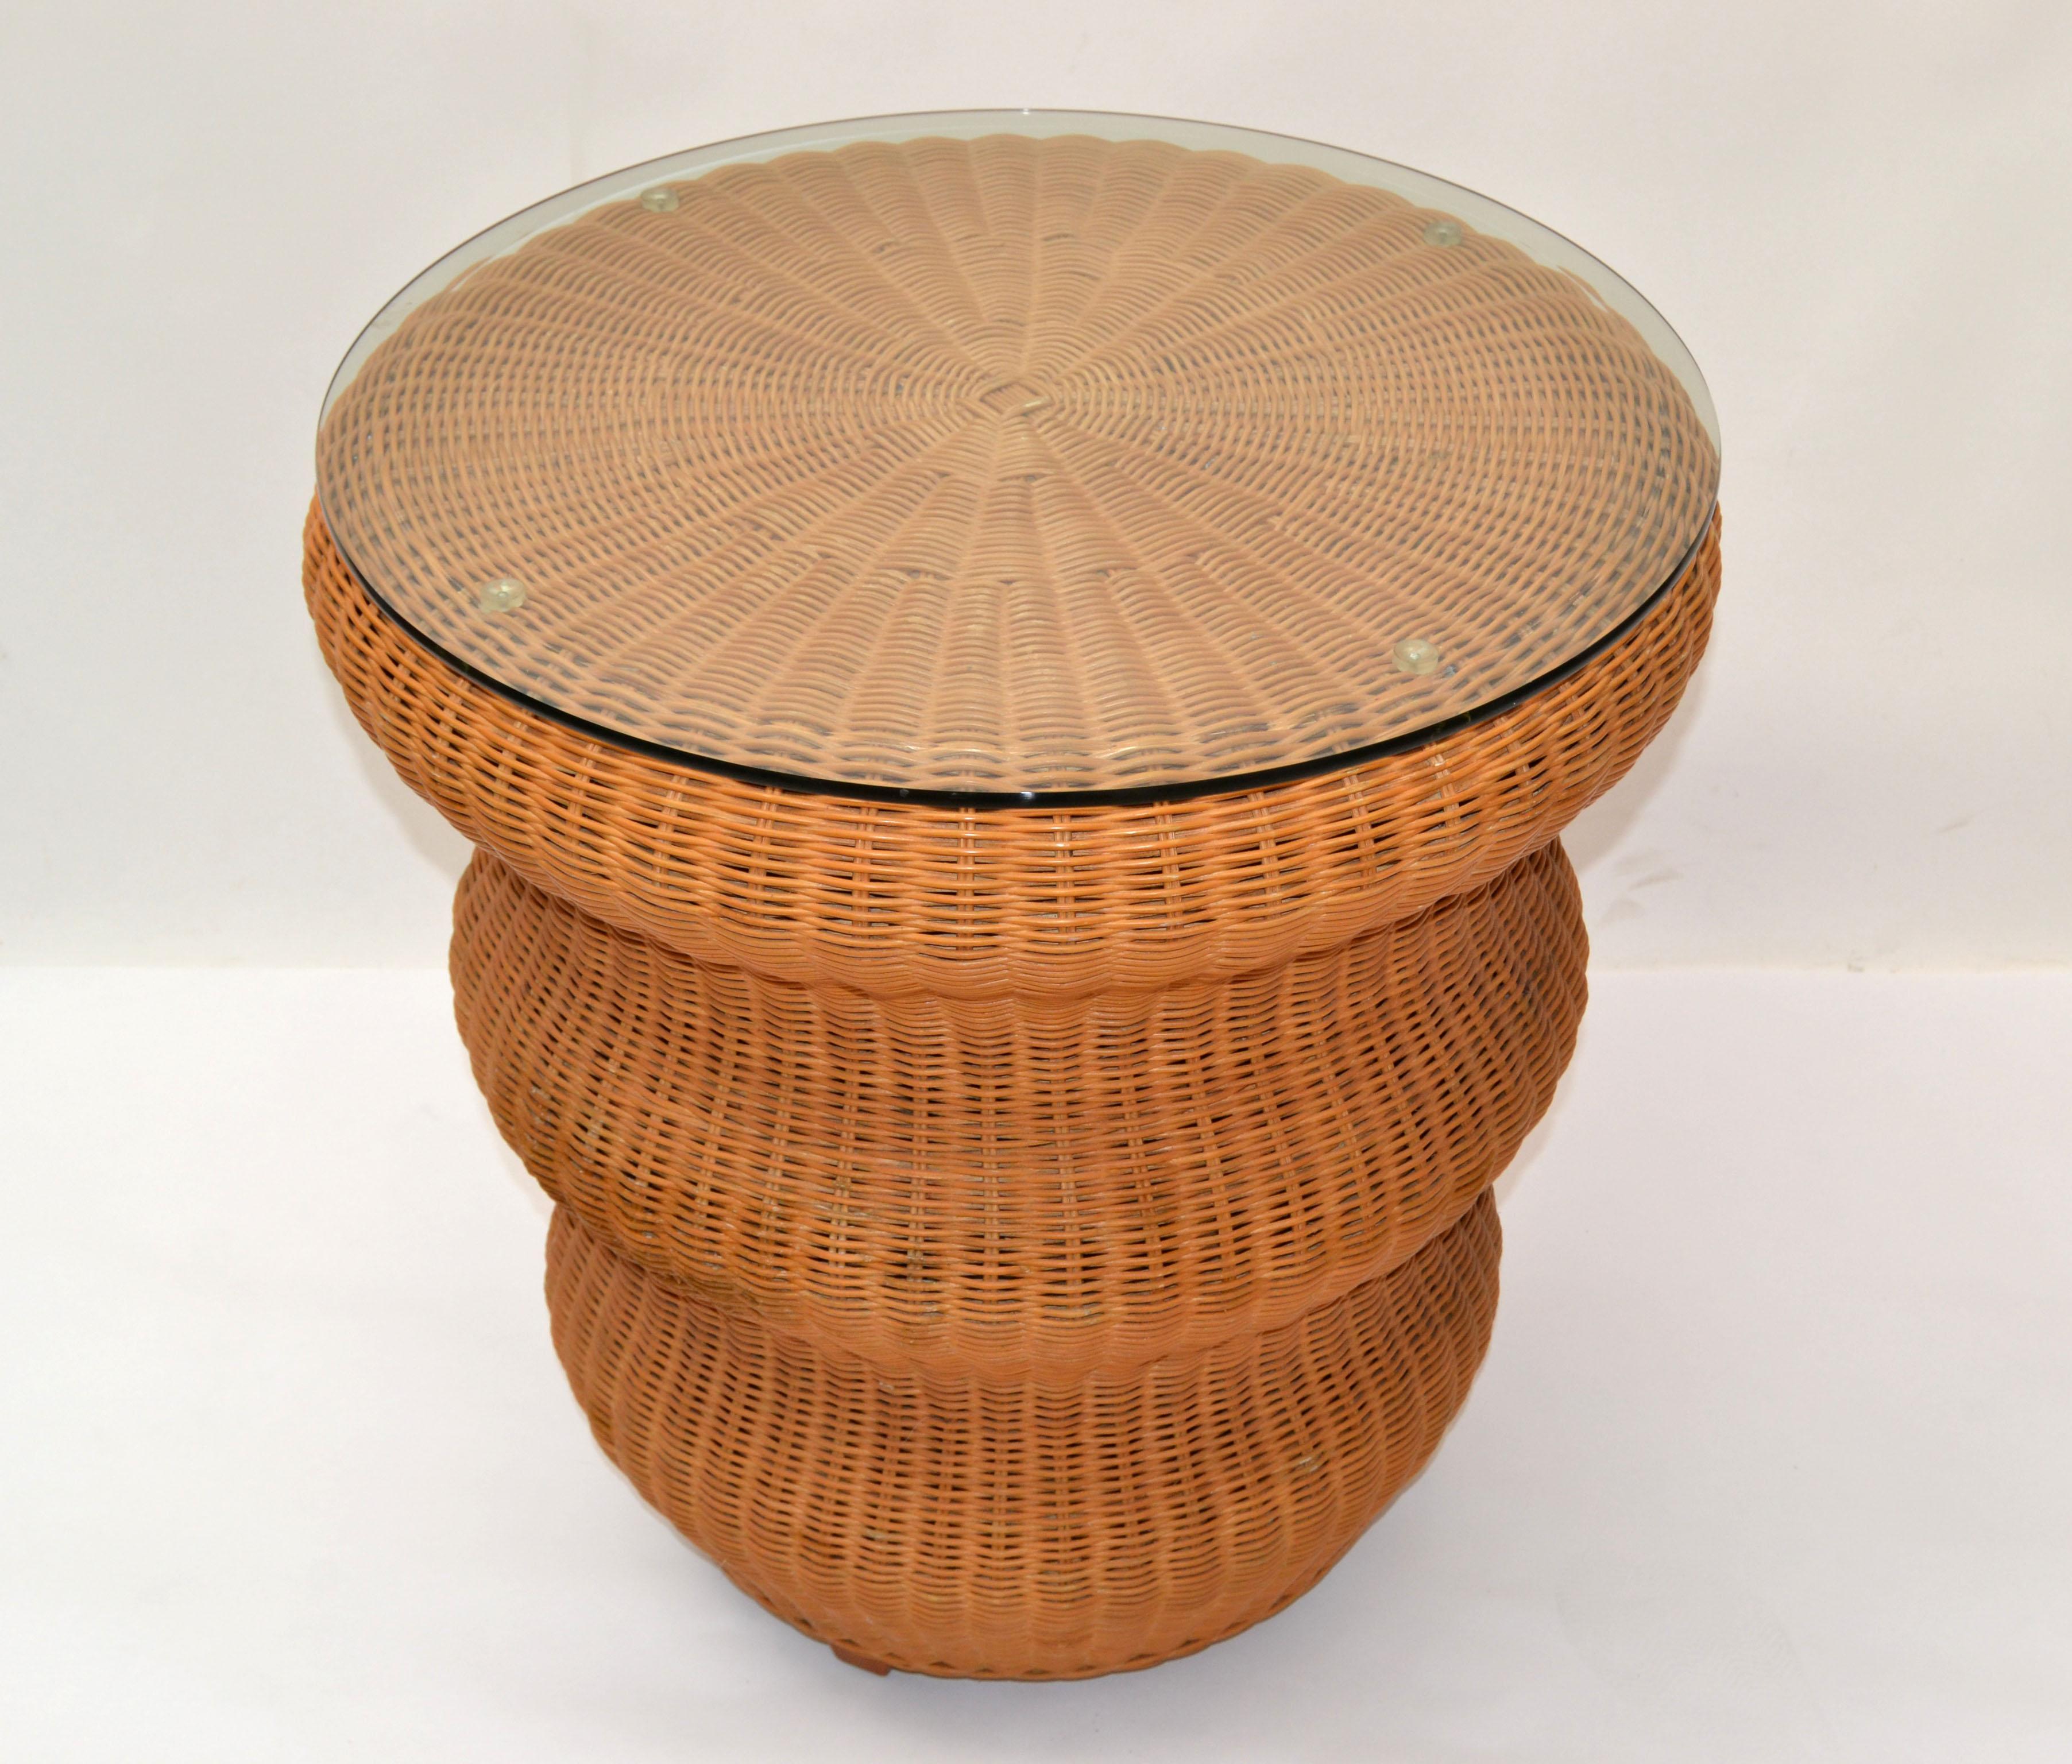 Boho Chic all handwoven Mushroom shaped wicker and rattan Cocktail Table or Coffee Table with round beveled Glass Top.
Glass Top diameter measures: 24 inches and is 1/4 inch thick.
Height: 26 inches.